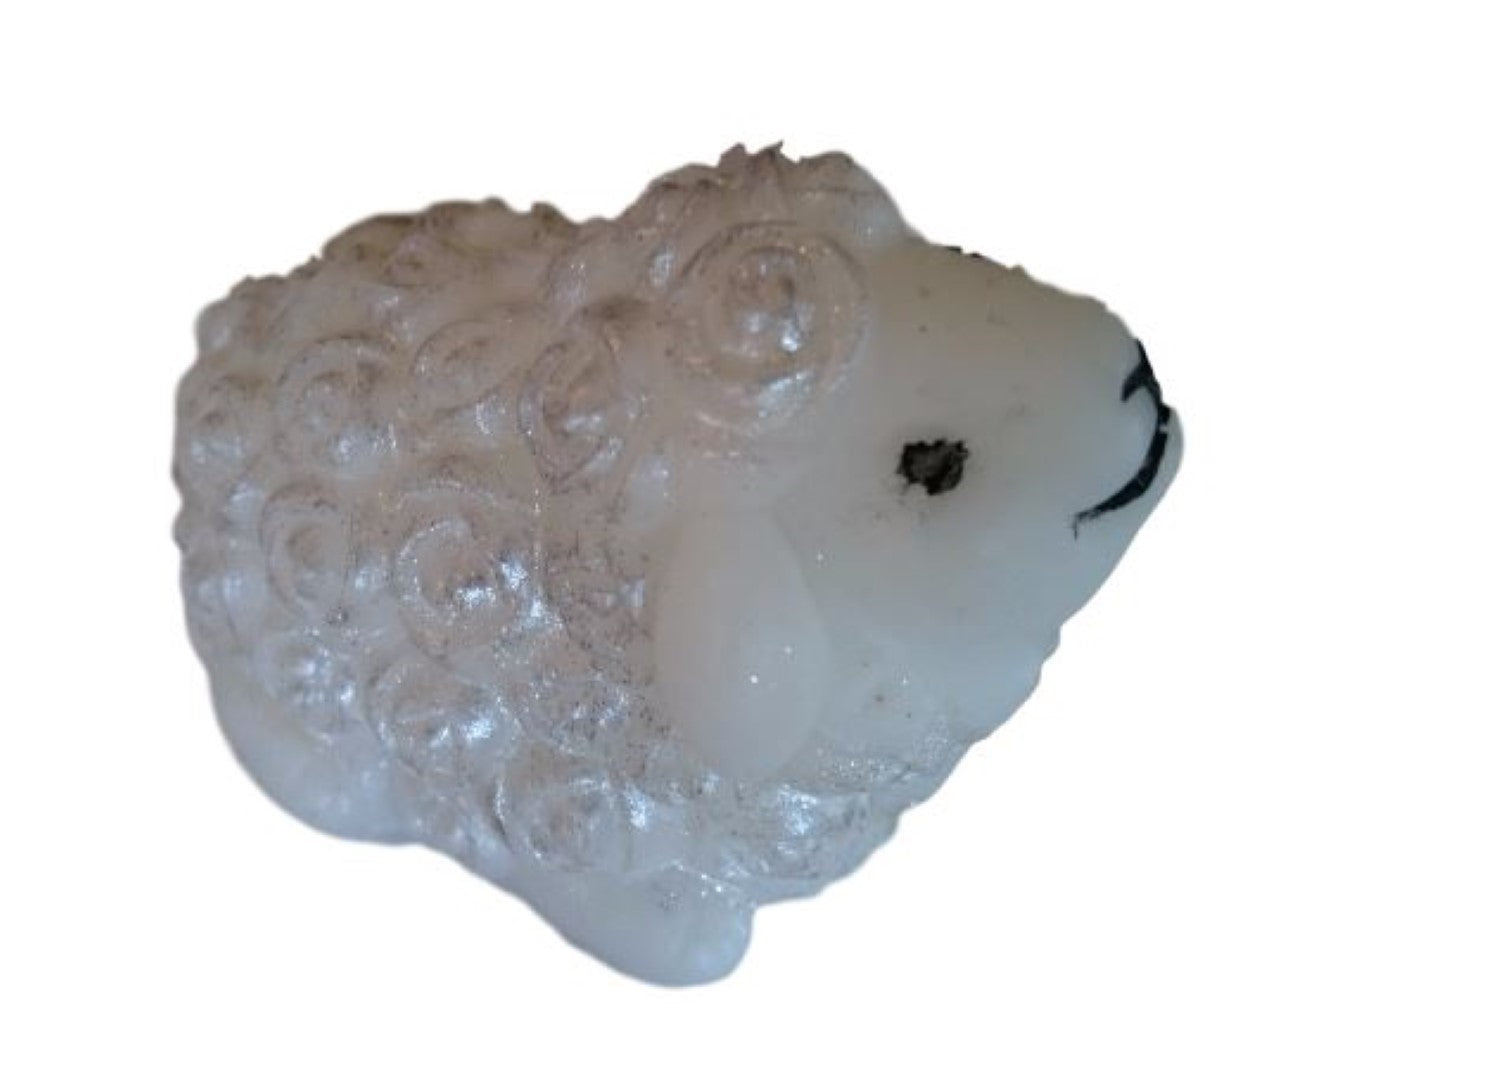 Sheep Rosy Silicone Mould